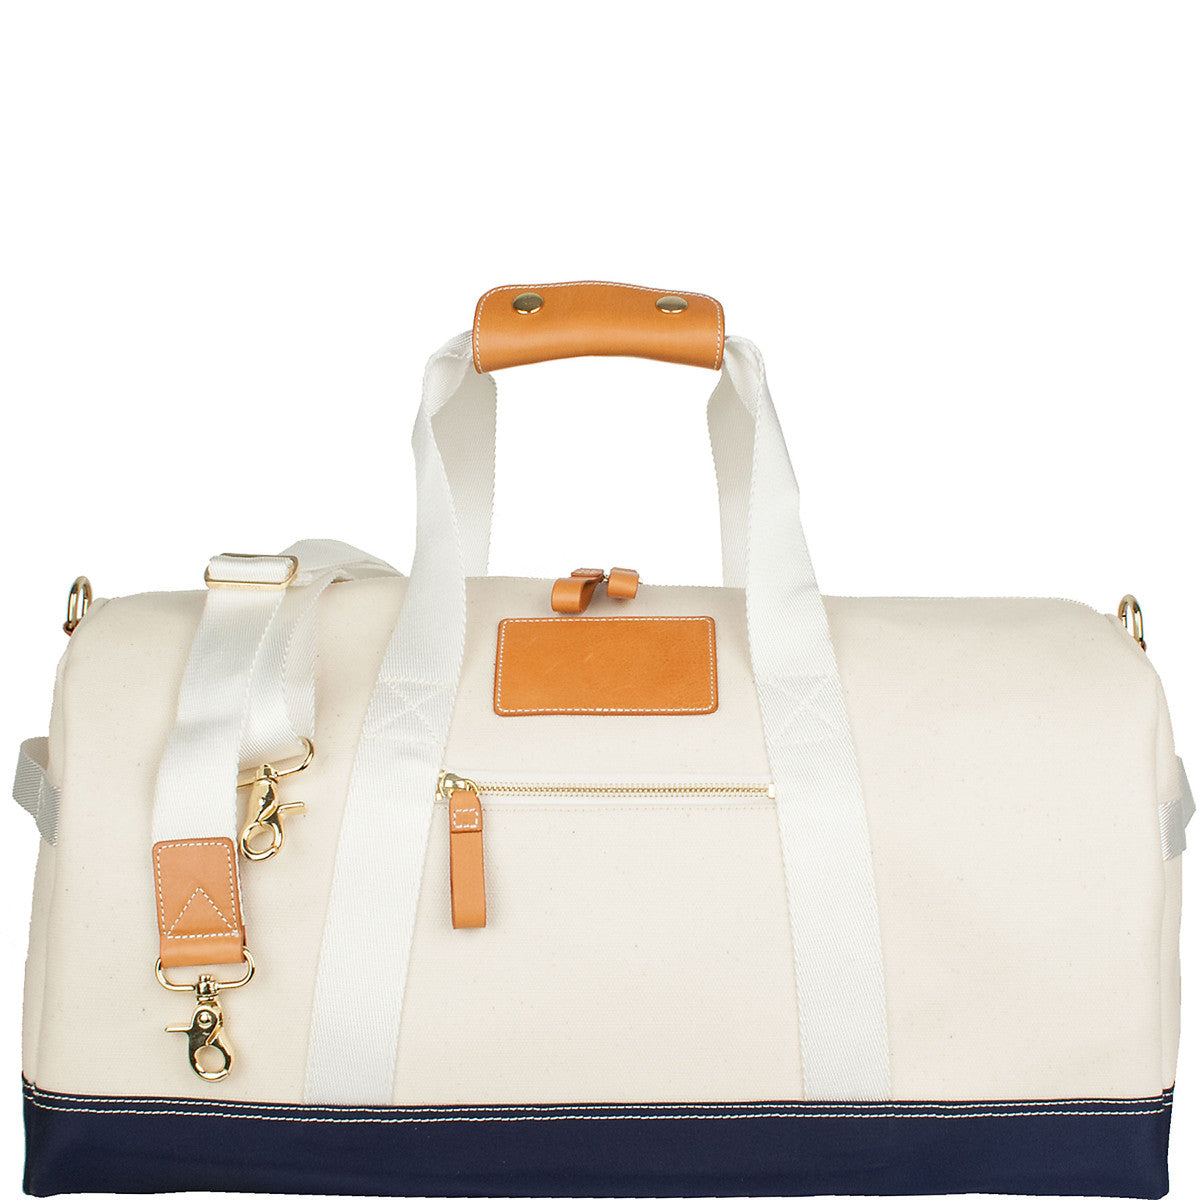 Canvas Duffel Bag - Give Wink